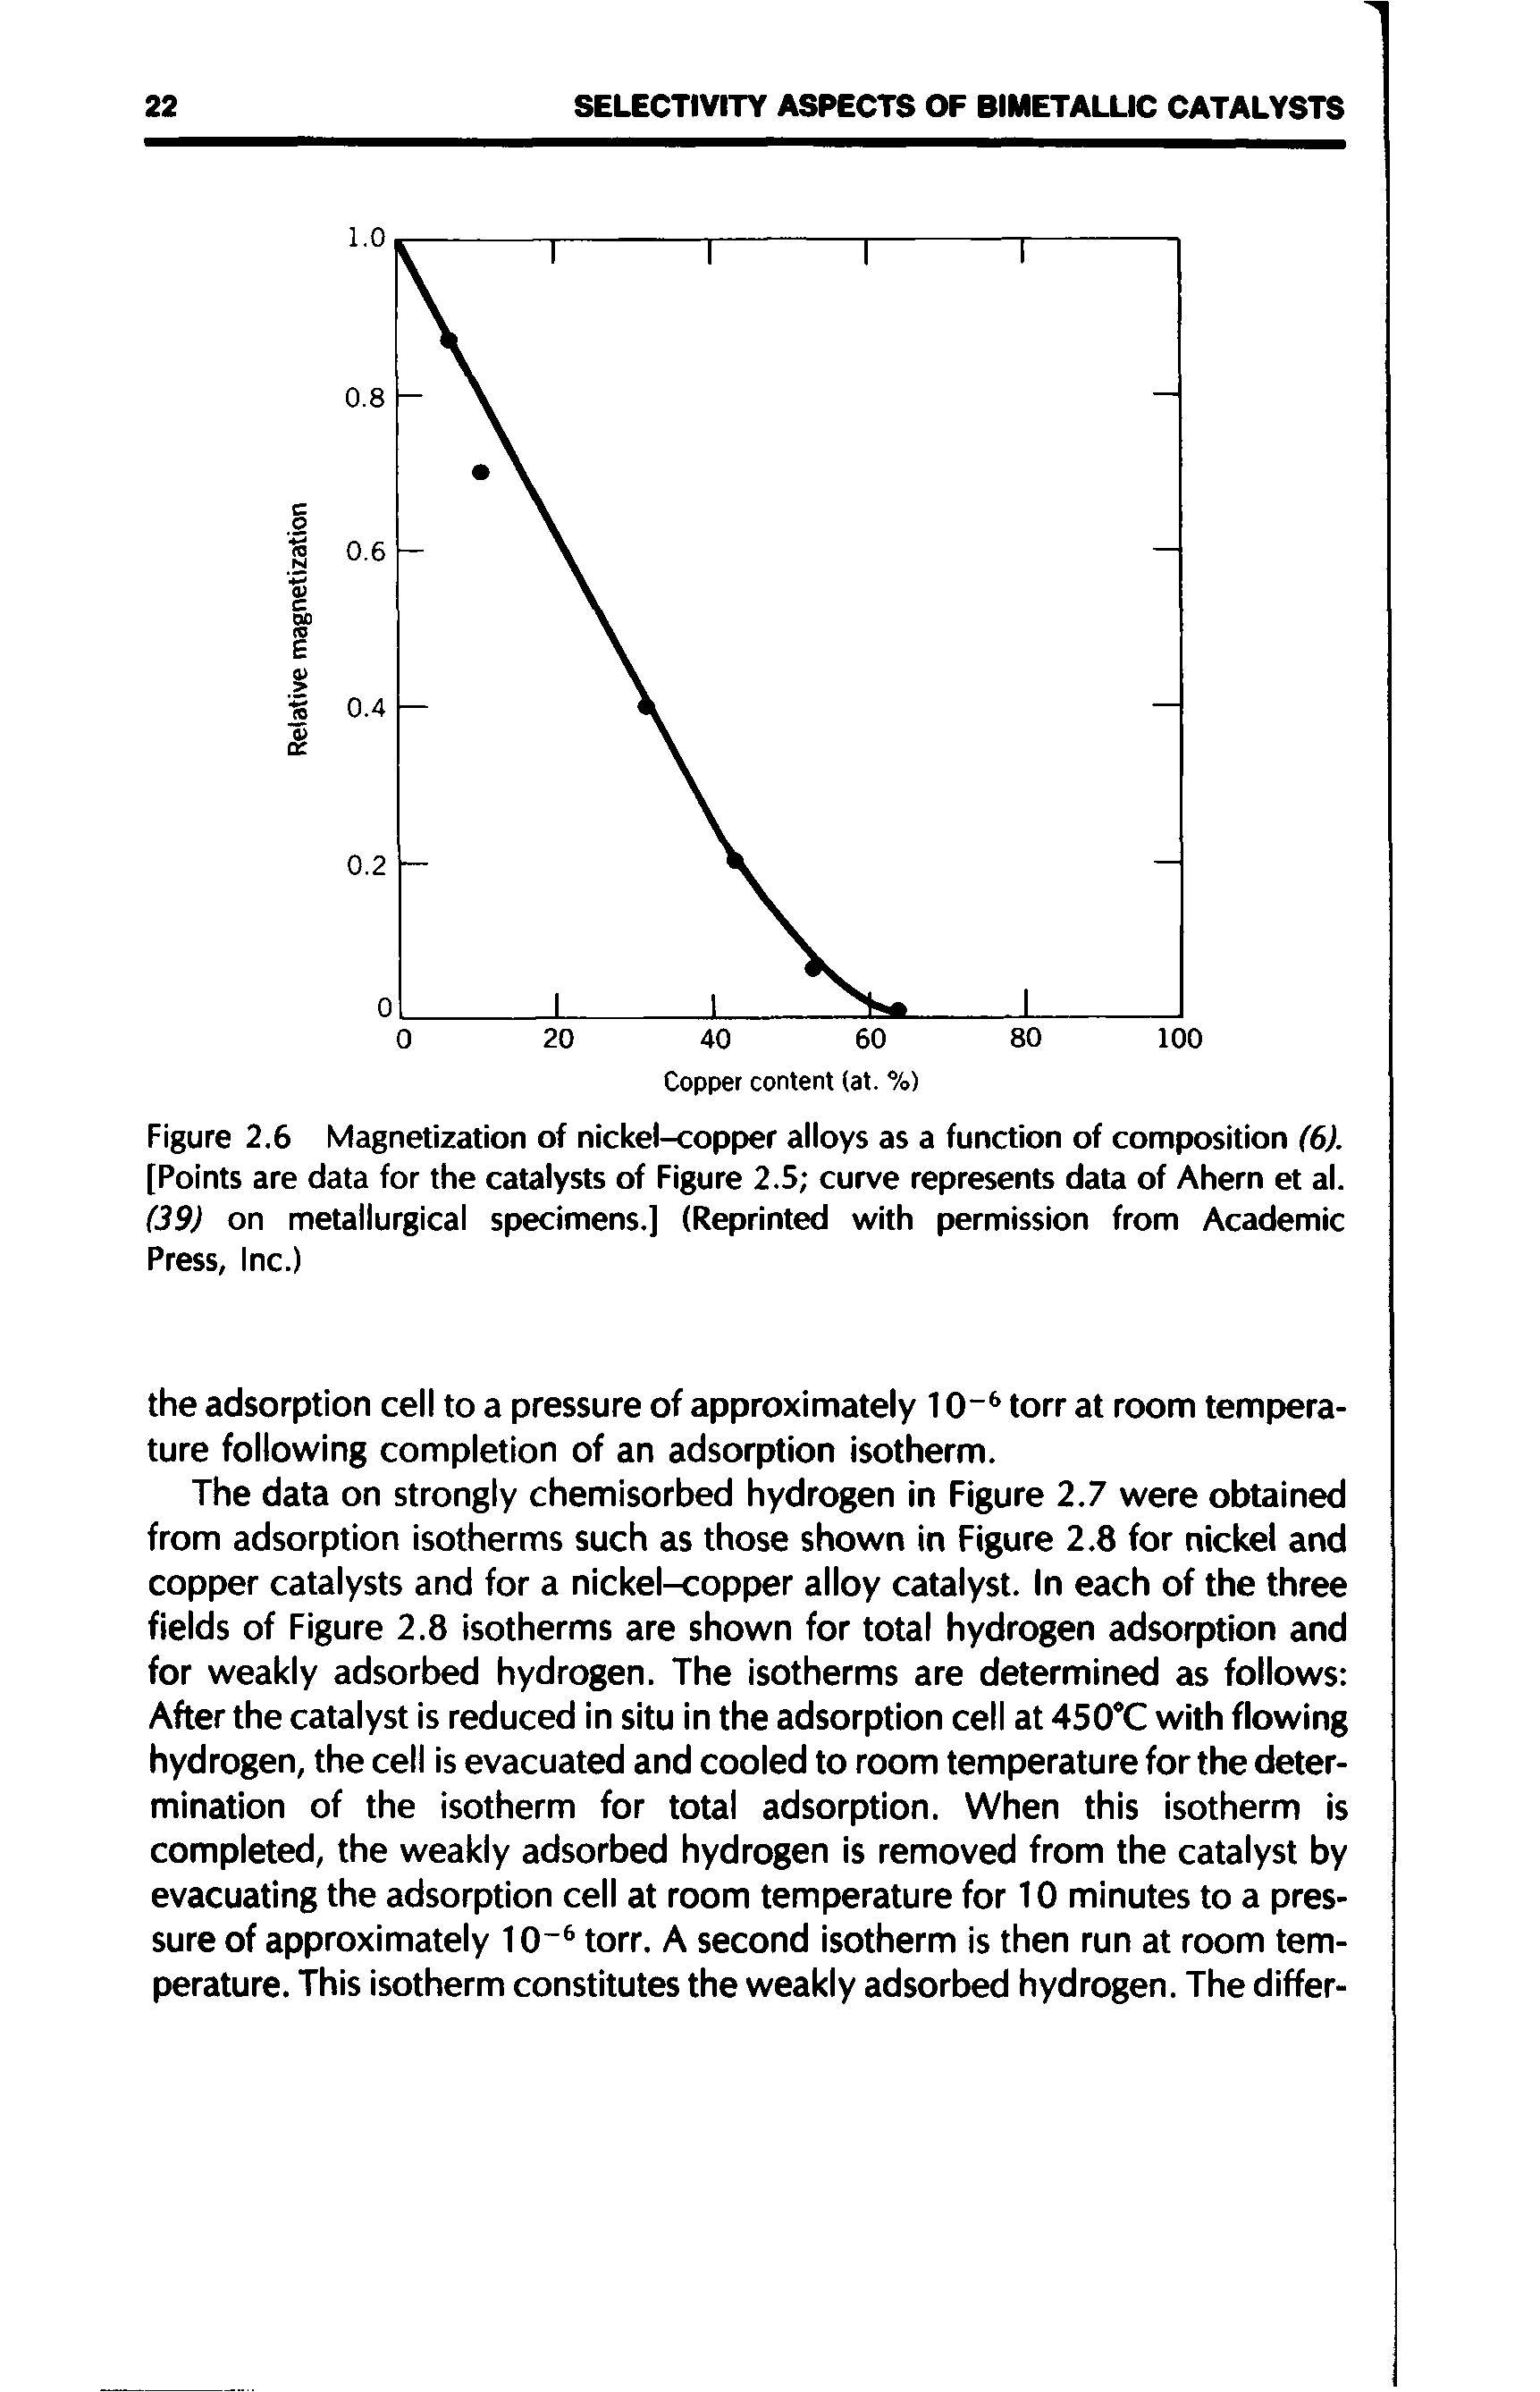 Figure 2.6 Magnetization of nickel-copper alloys as a function of composition (6). [Points are data for the catalysts of Figure 2.5 curve represents data of Ahern et al. (39) on metallurgical specimens.] (Reprinted with permission from Academic Press, Inc.)...